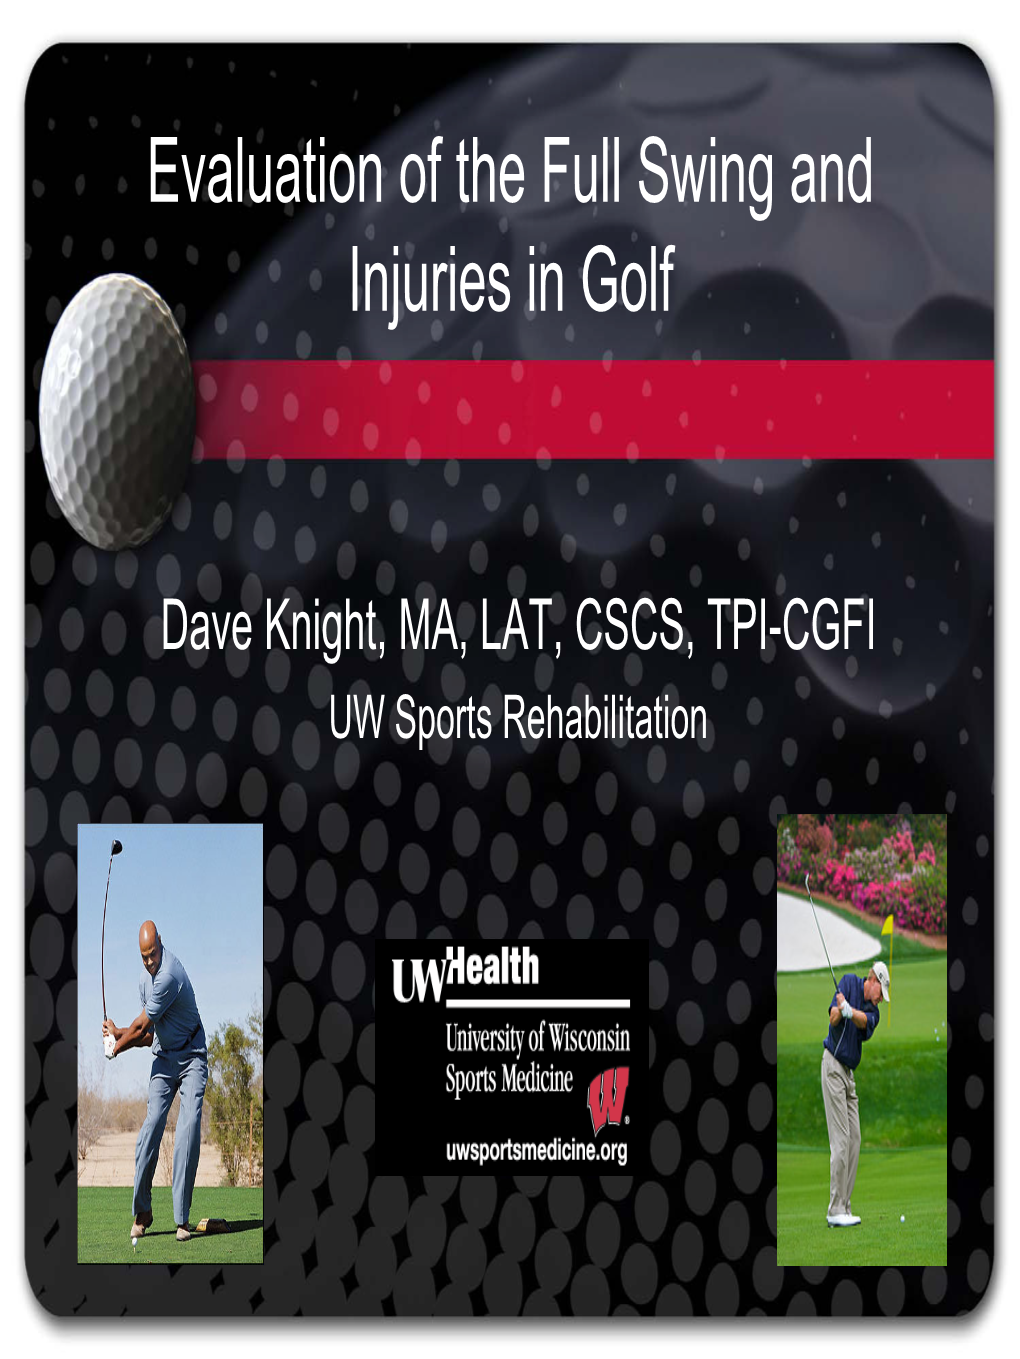 Evaluation of the Full Swing and Injuries in Golf